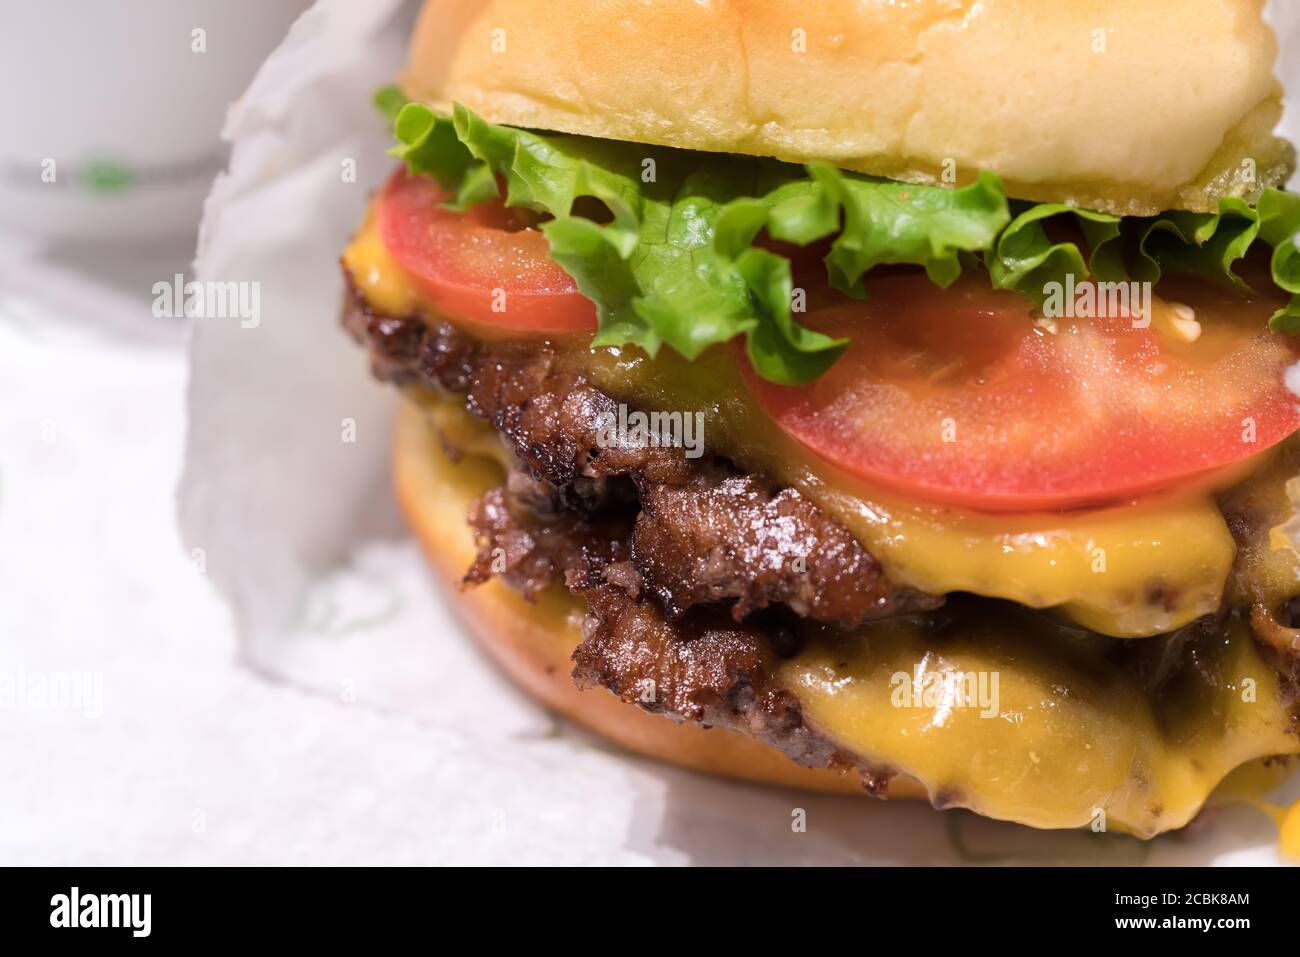 Double cheeseburger with tomato lettuce and onion, Cheese Fries and Milkshake. Stock Photo